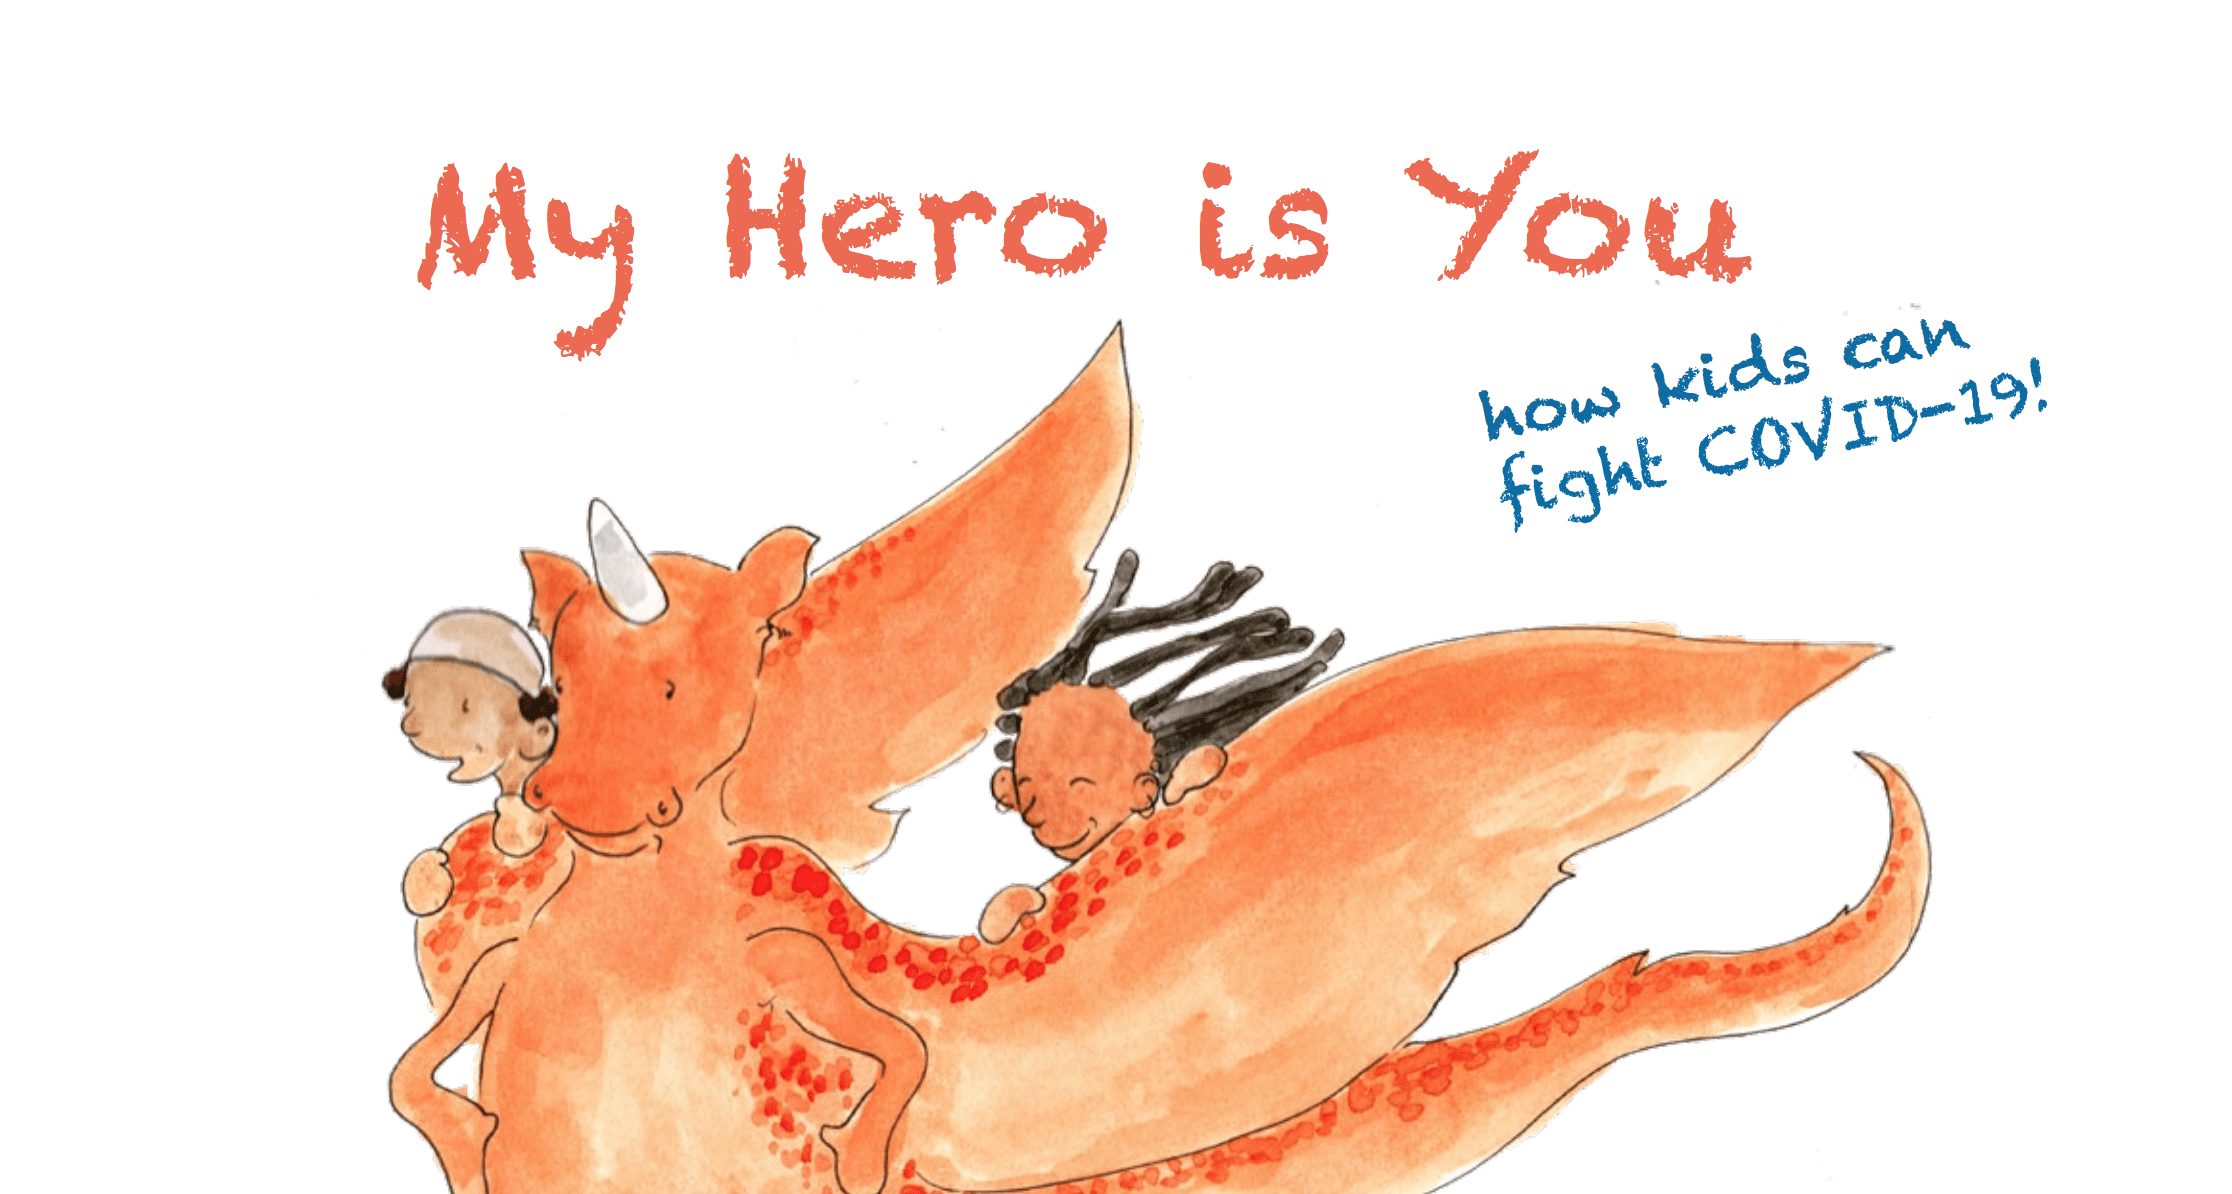 My Hero is You, Storybook for Children on COVID19